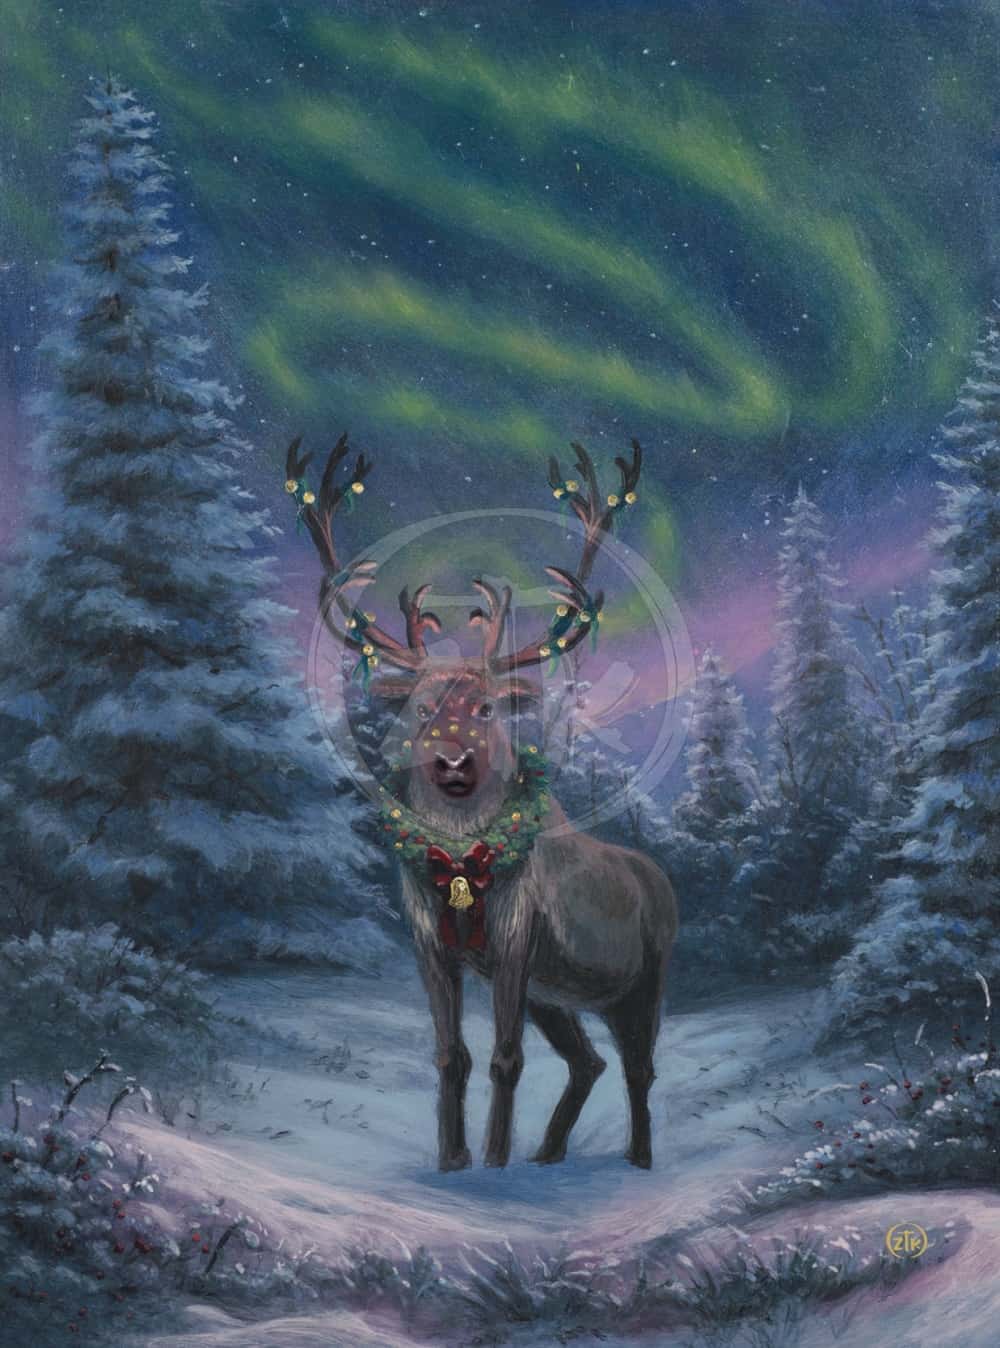 A Reindeer’s Finery